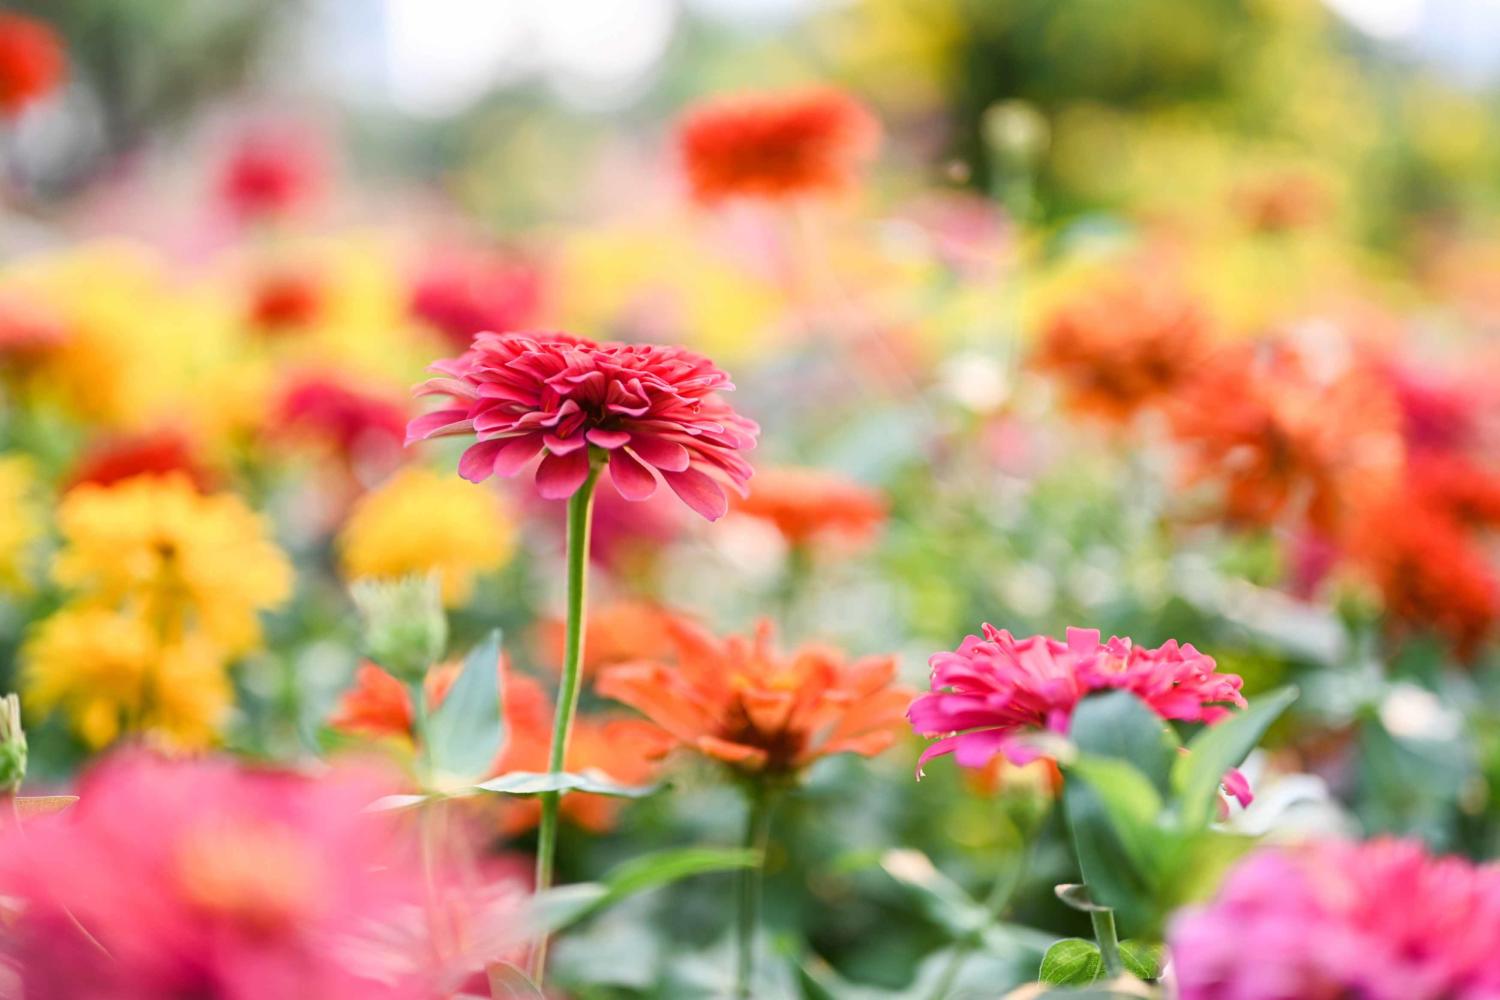 Field of various colored Zinnias.